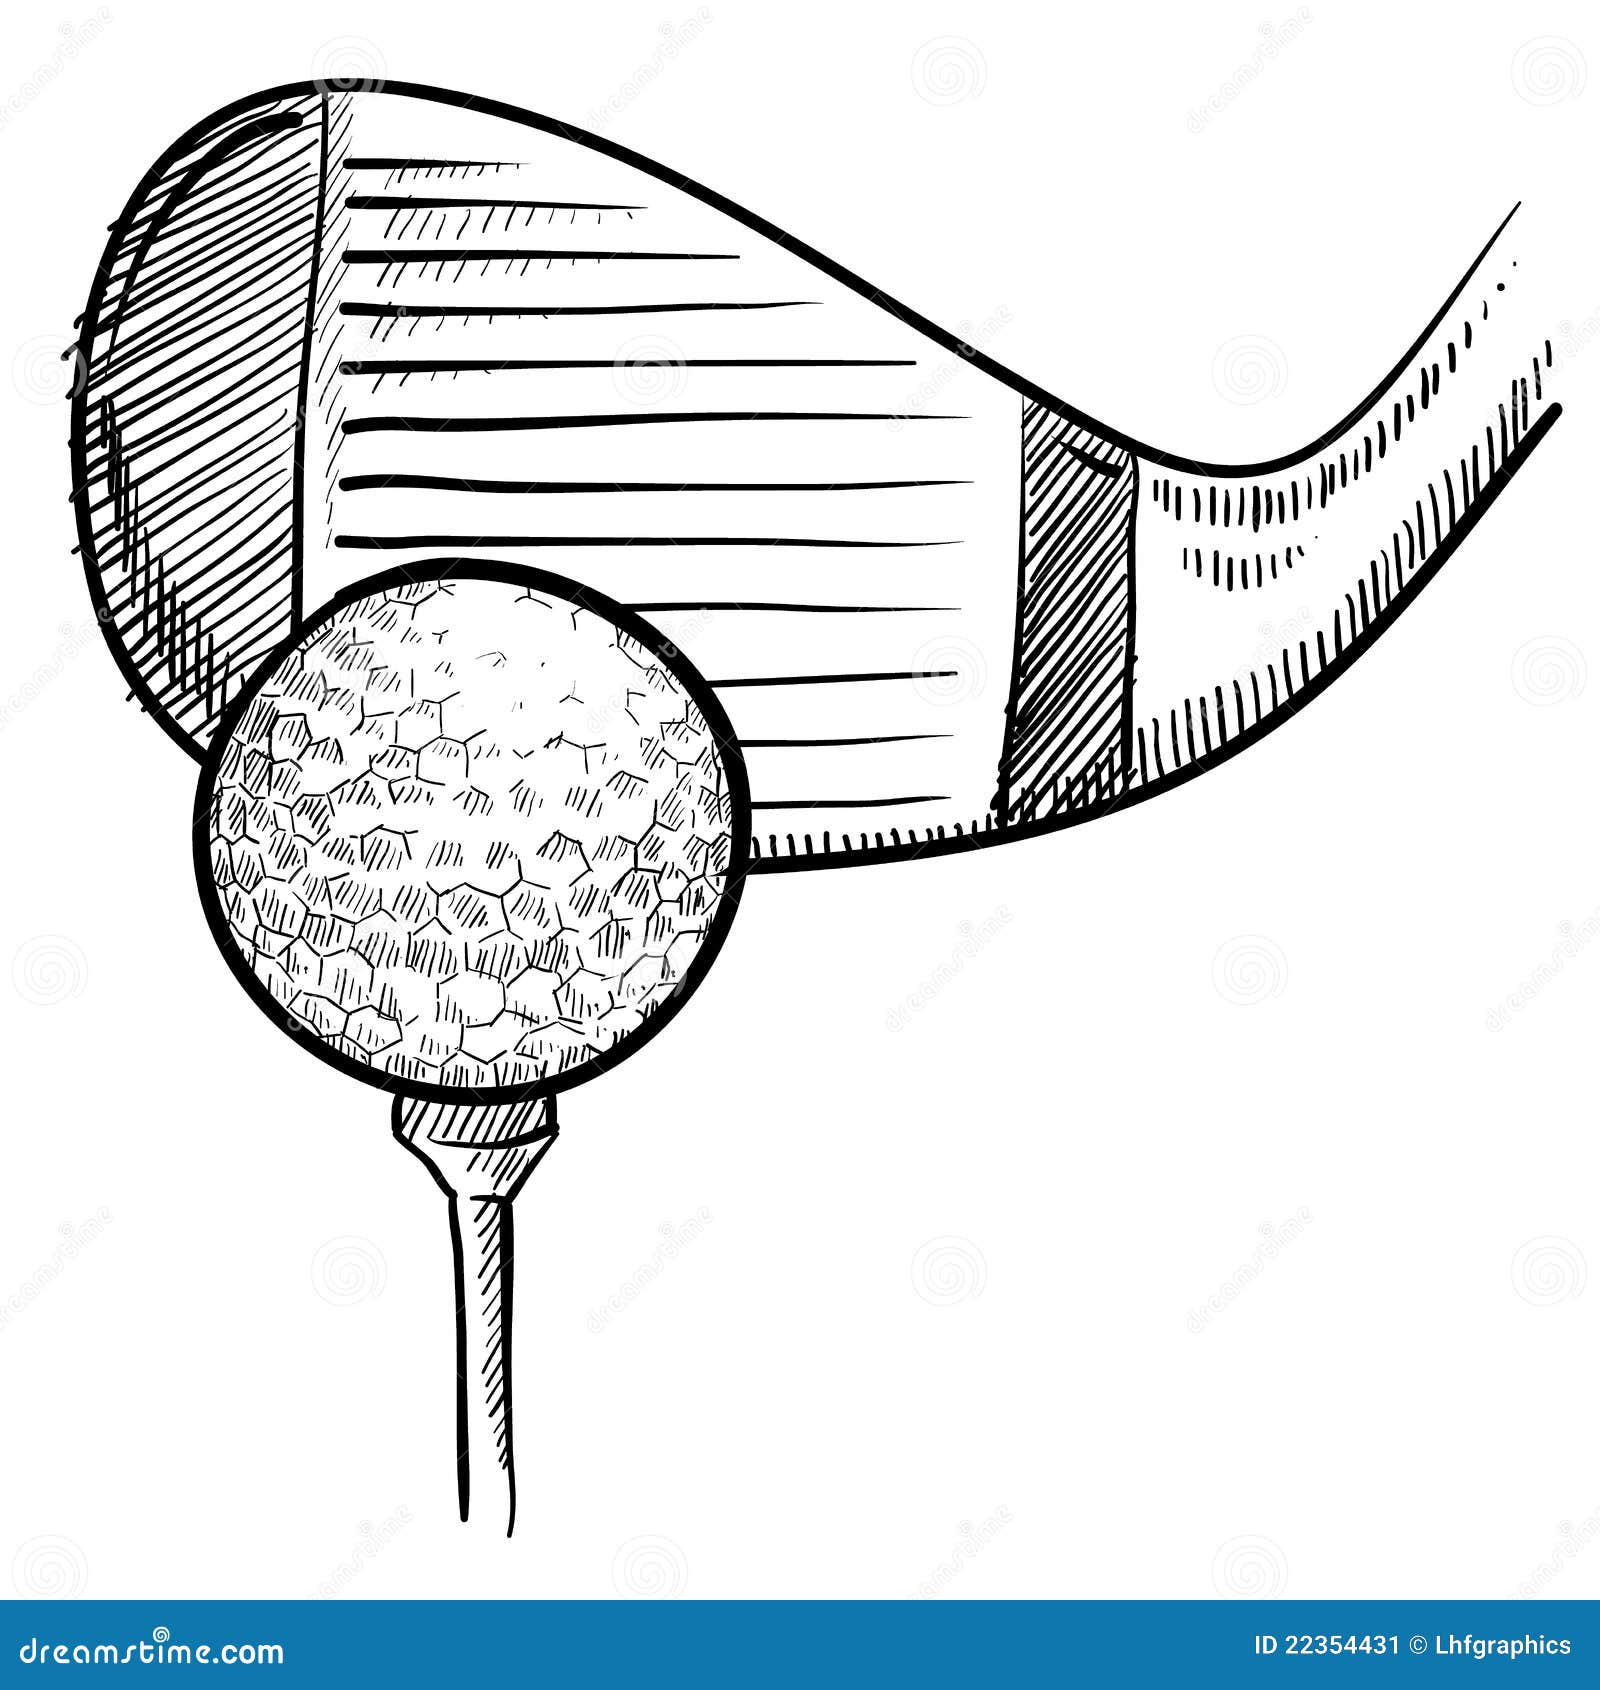 Golf club and ball sketch stock vector. Illustration of player - 22354431